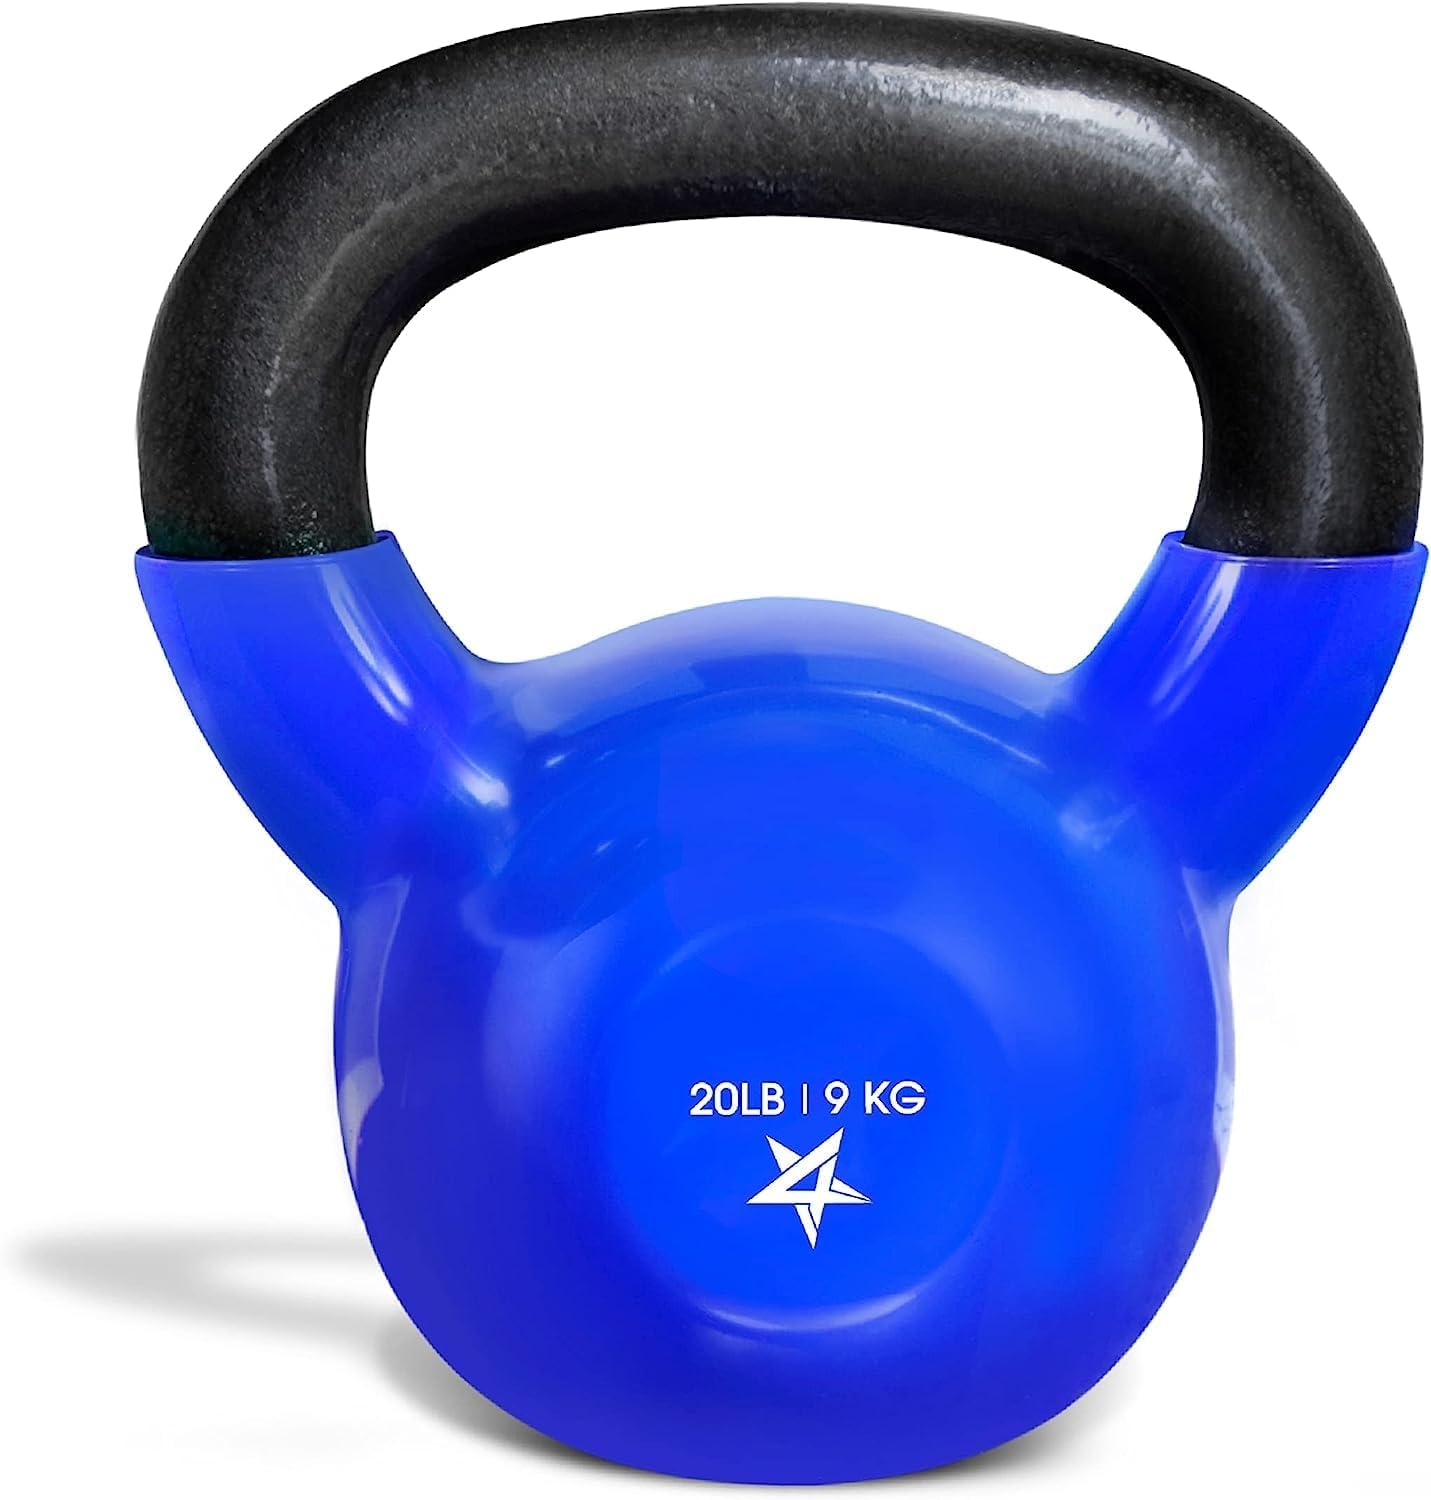 Yes4All Vinyl Coated Kettlebell Weights, Weight Available: 5, 10, 15, 20, 25, 30, 35, 40, 45, 50 Lb – Strength Training